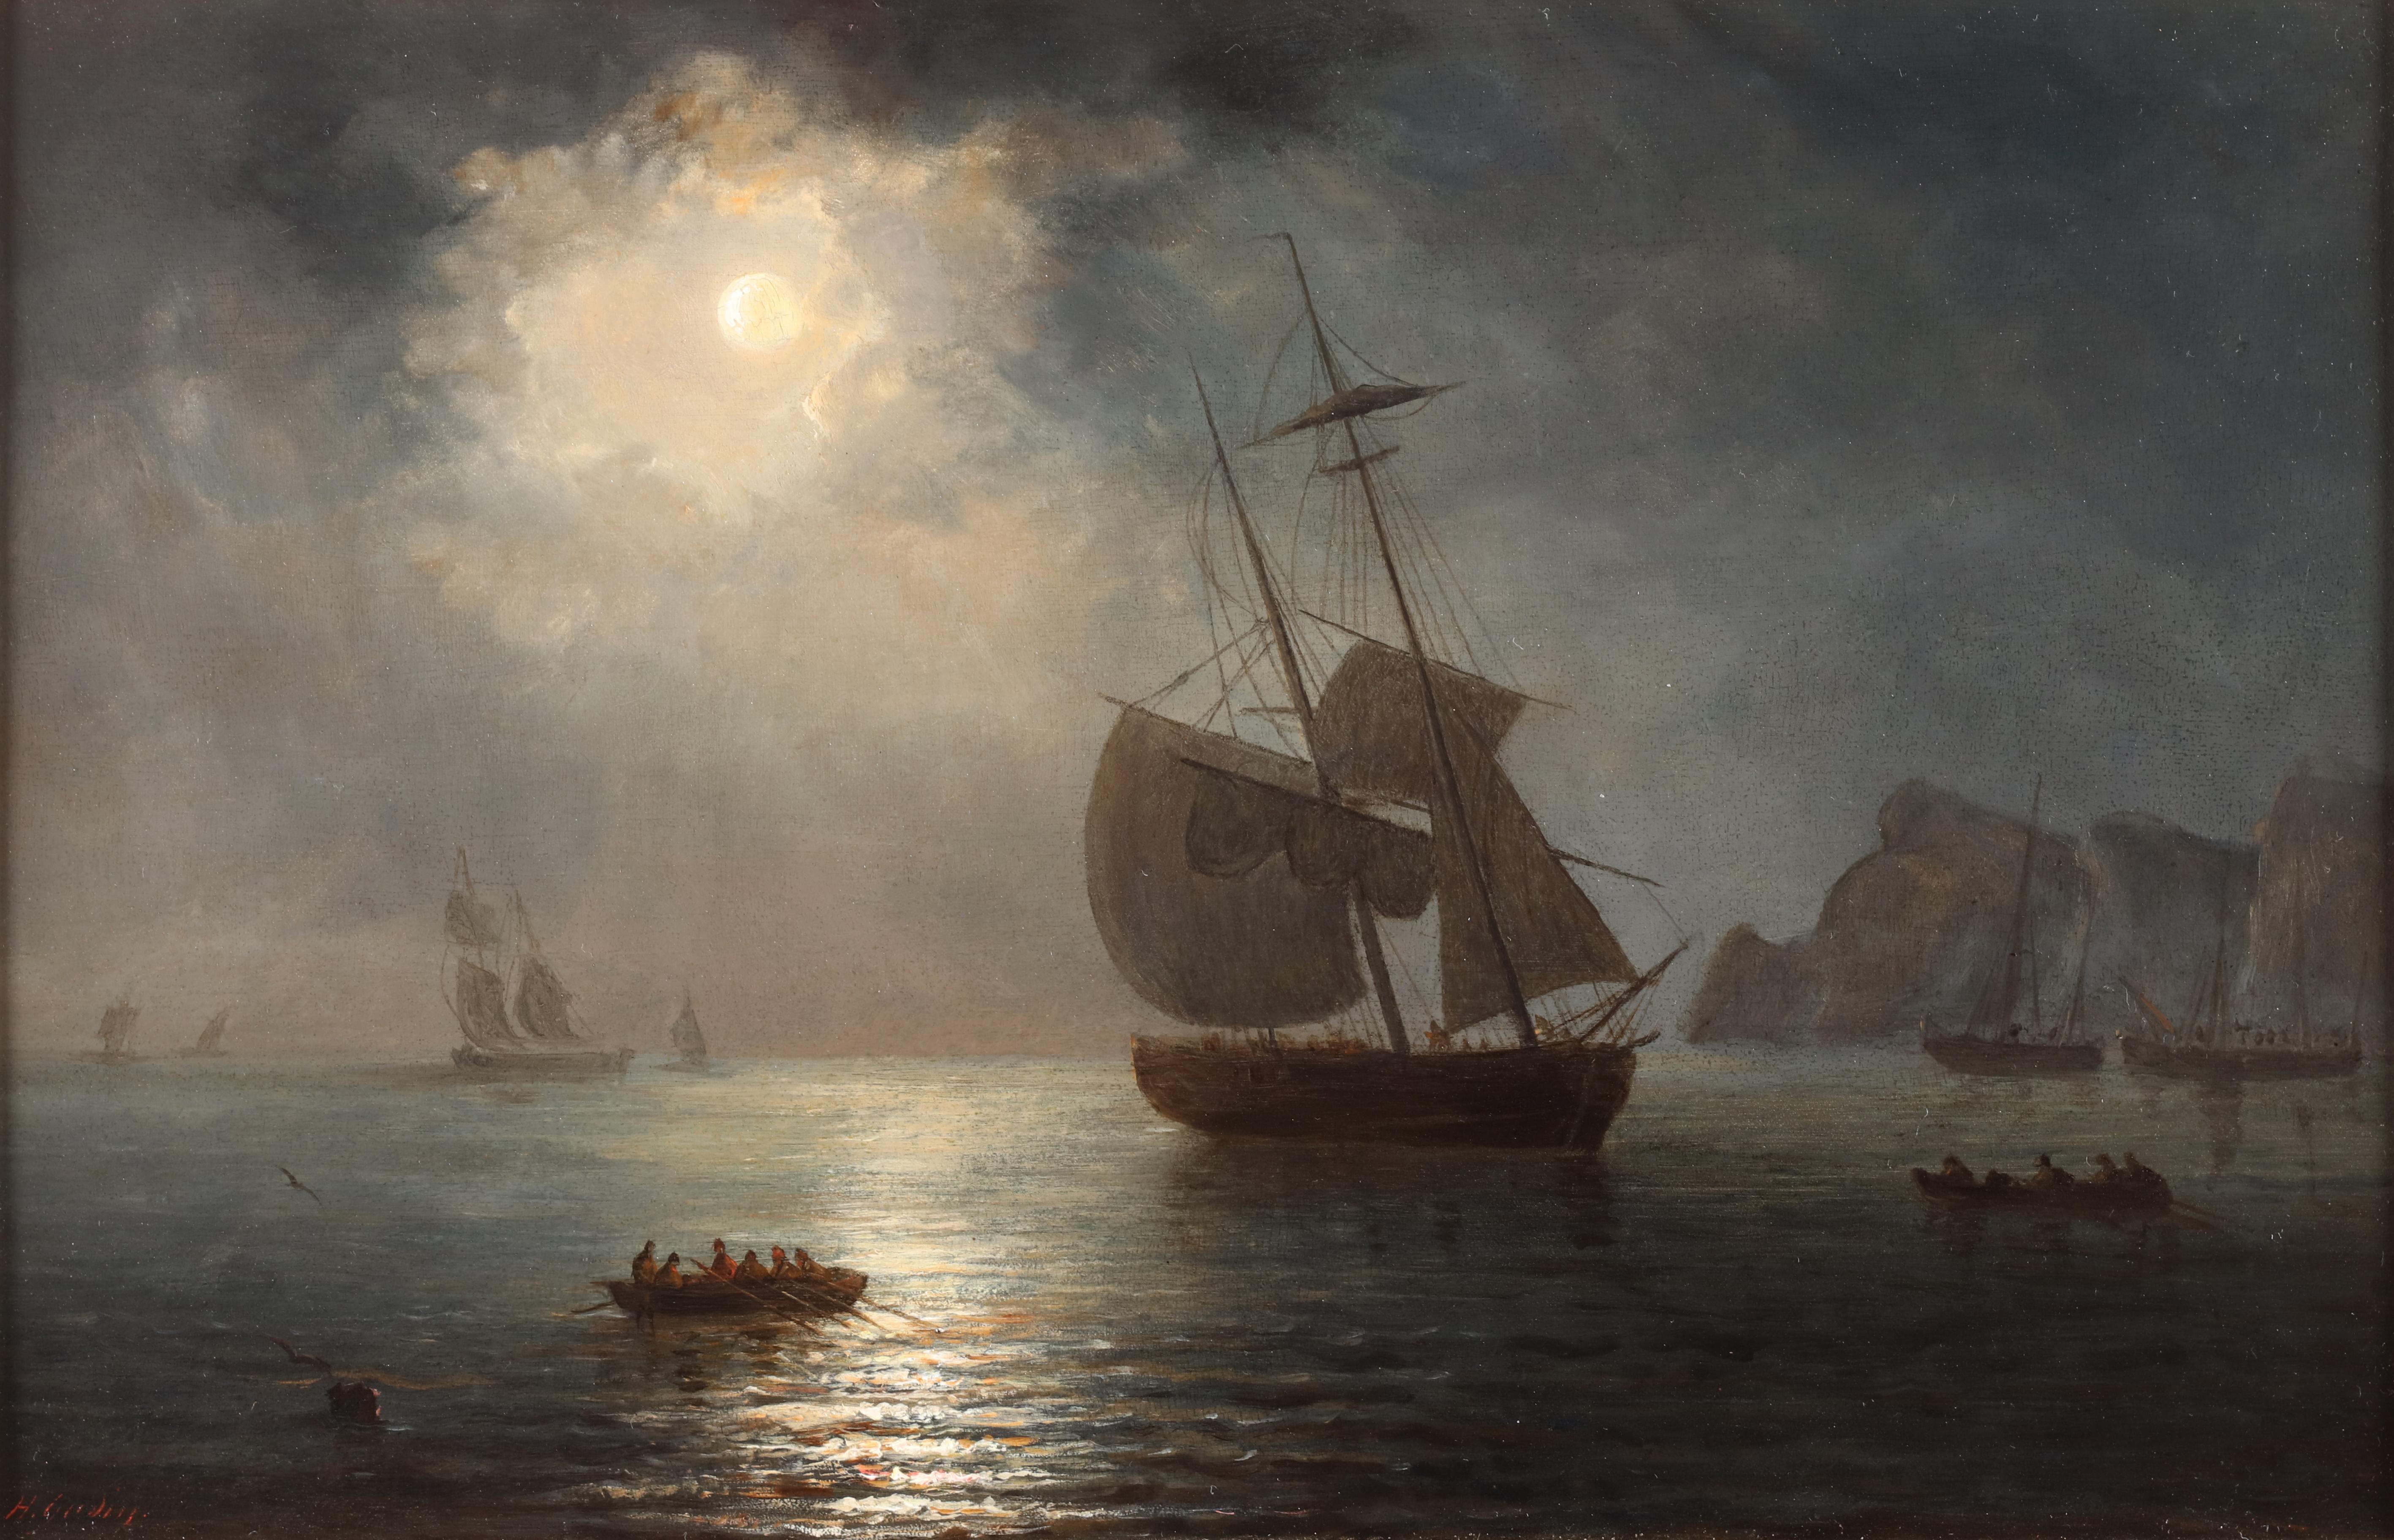 Oil on panel

Signed lower left: “H. Gudin.”

The light of the full moon falls through a broken cloud. The light is spread over the calm sea, where a large two-master with set sails is visible. Several small manned rowing boats are seen around it.